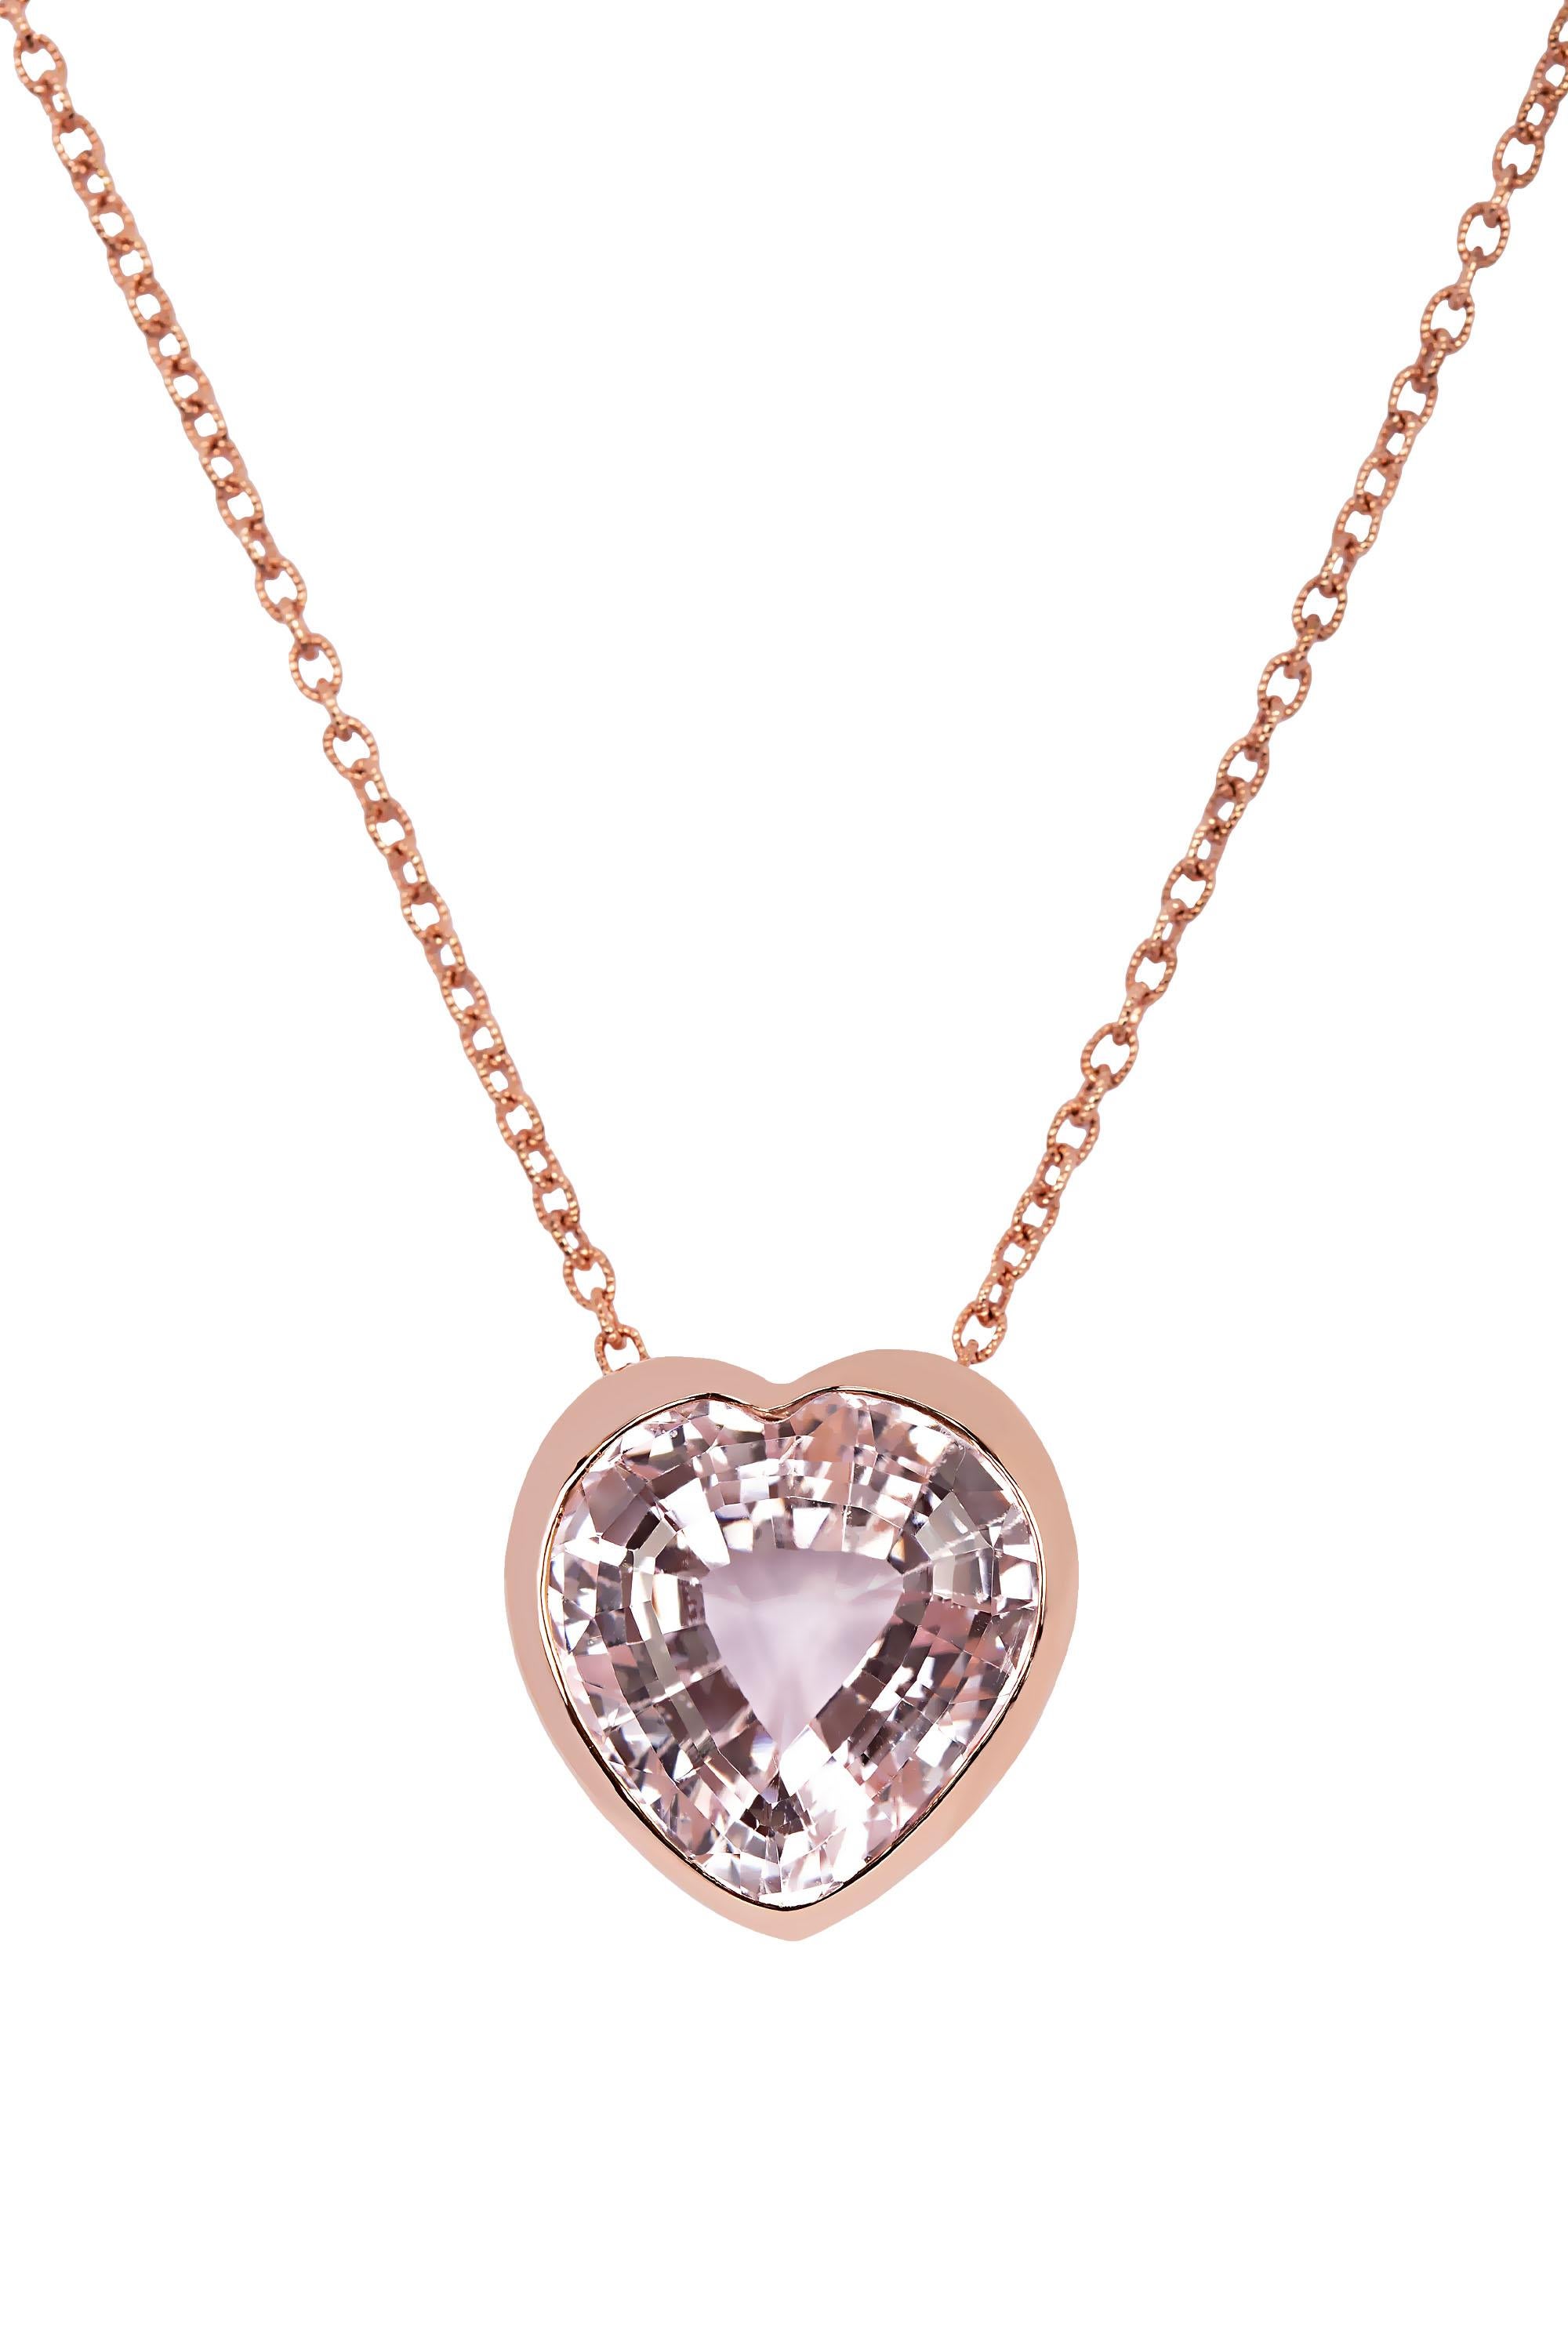 Contemporary Heart Shaped Kunzite 30.86 Carat Rose Gold Necklace